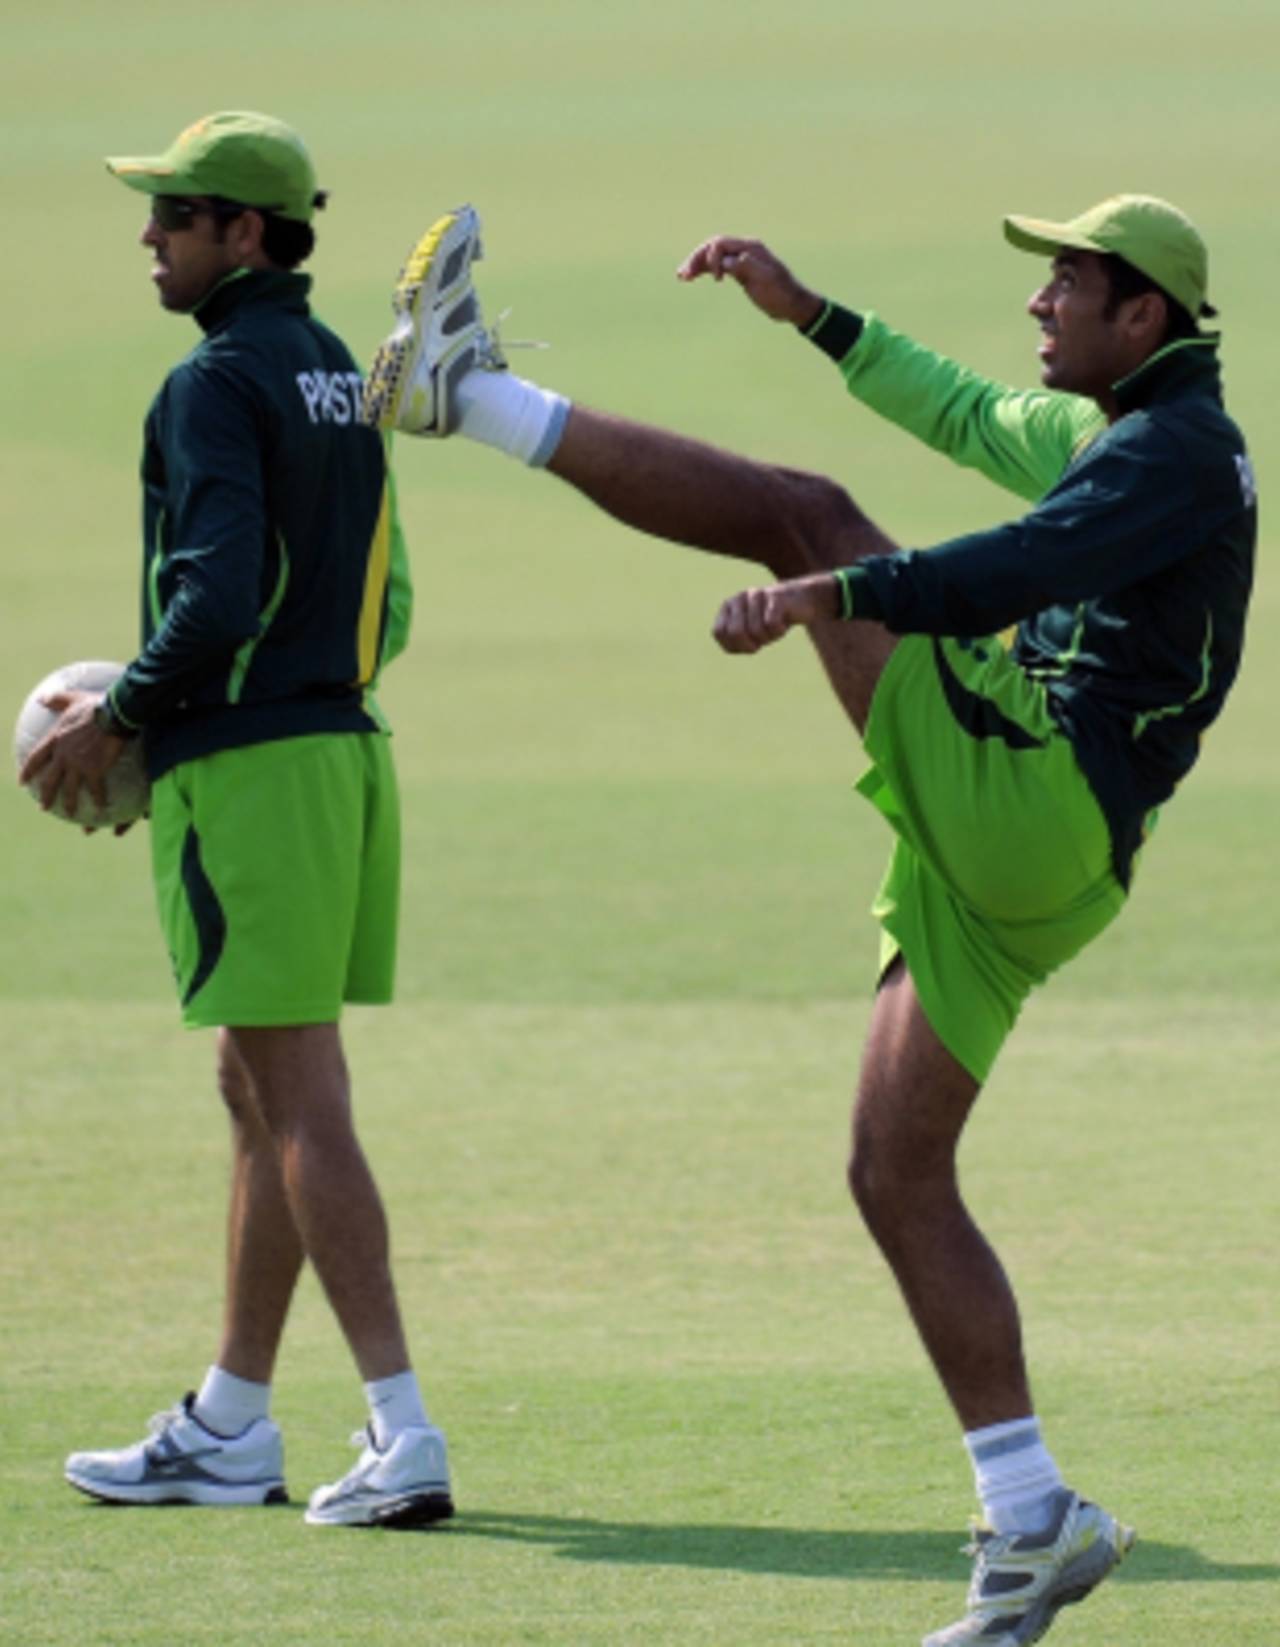 Umar Gul and Wahab Riaz warm up during Pakistan's training session, Mohali, World Cup 2011, March 26, 2011 